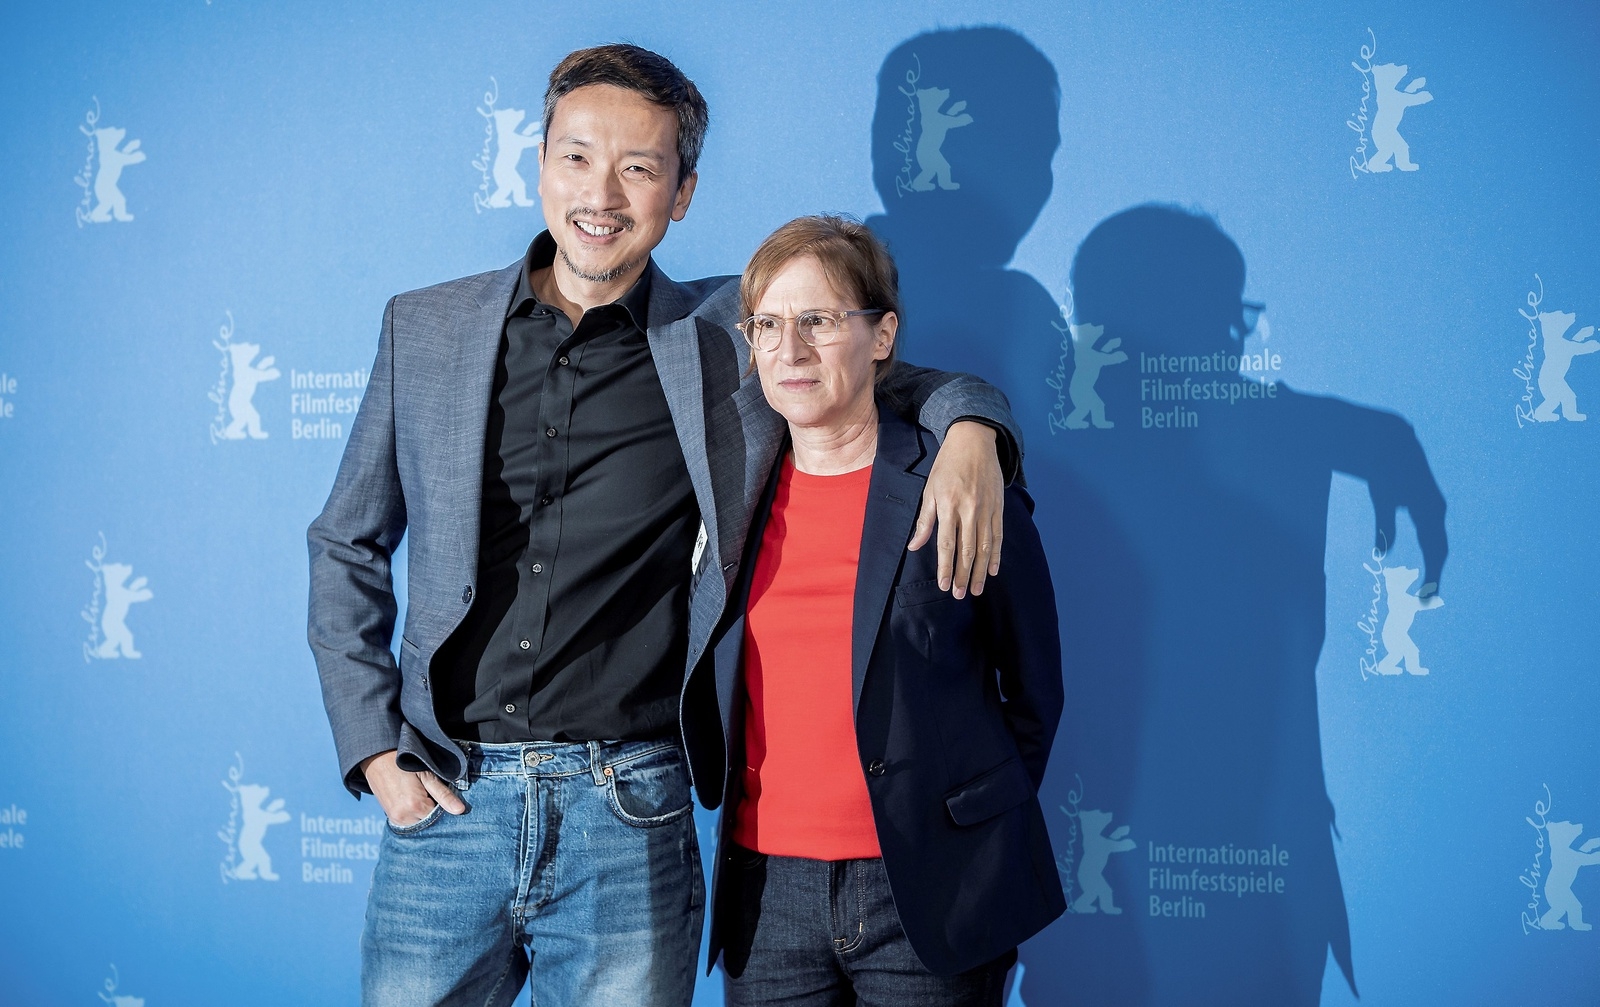 Actor Orion Lee, left, and director Kelly Reichardt, right, pose for photographers during a photo-call for the film 'First Cow' during the 70th International Film Festival Berlin, Berlinale, in Berlin, Germany, Saturday, Feb. 22, 2020. (Michael Kappeler/dpa via AP)  DMSC110